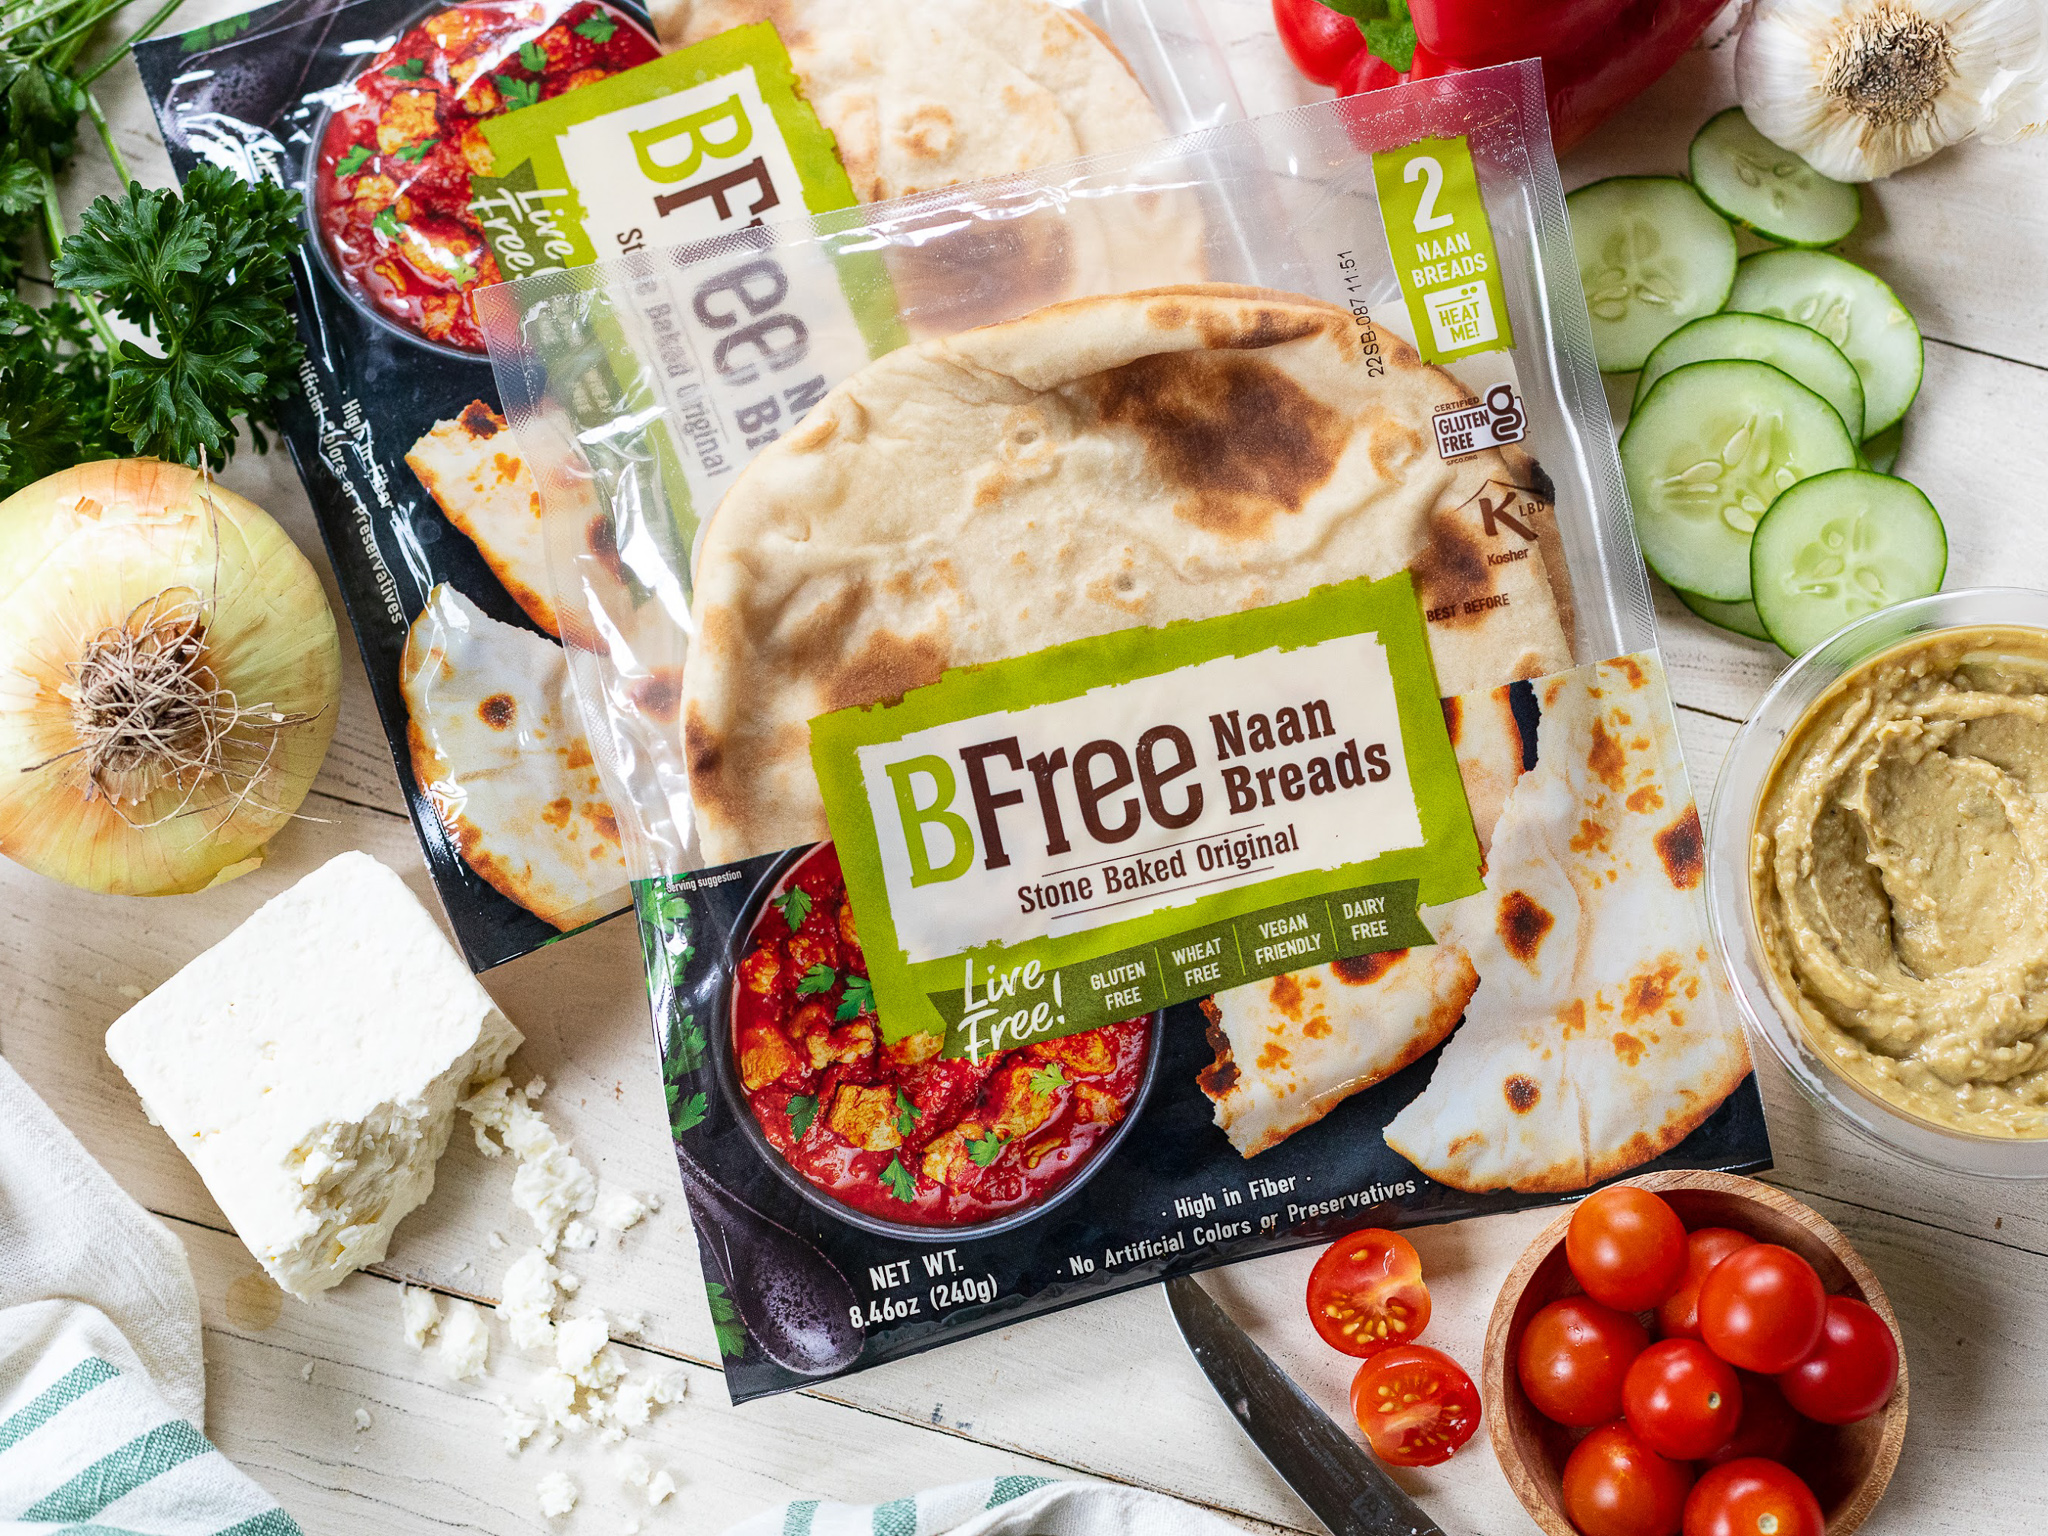 Let’s Celebrate The Launch Of BFree Naan Breads With A Giveaway – Win A $100 Publix Gift Card!